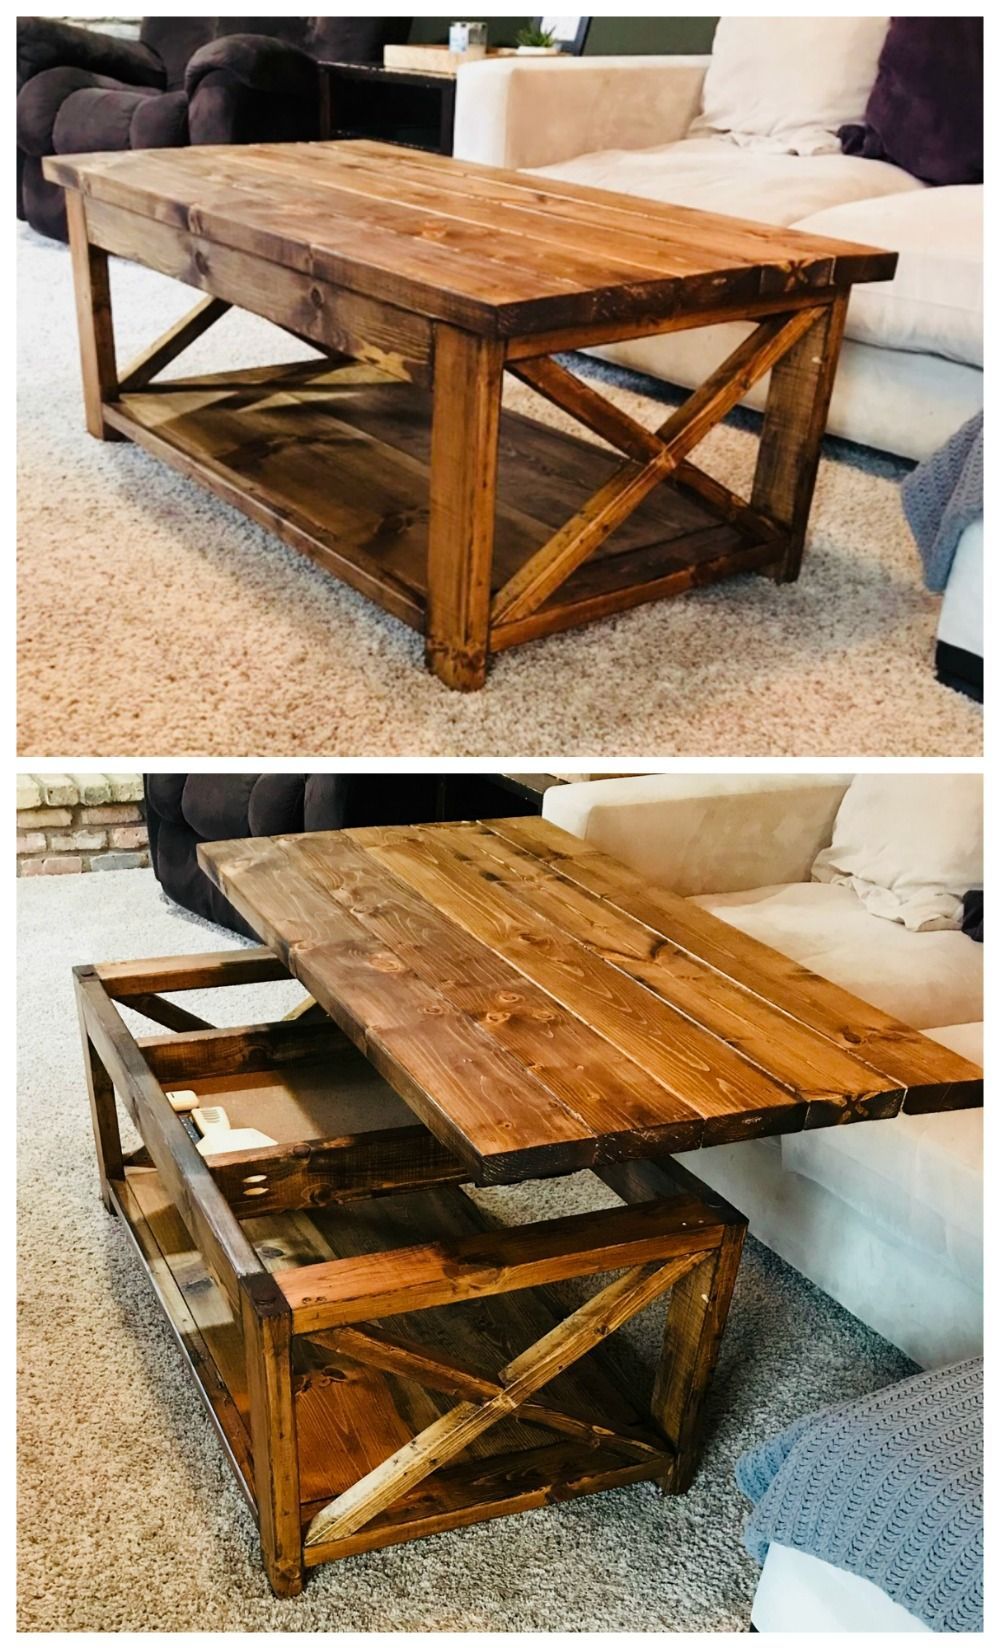 Lift Top Coffee Table | Ana White -   19 diy projects Storage decor ideas